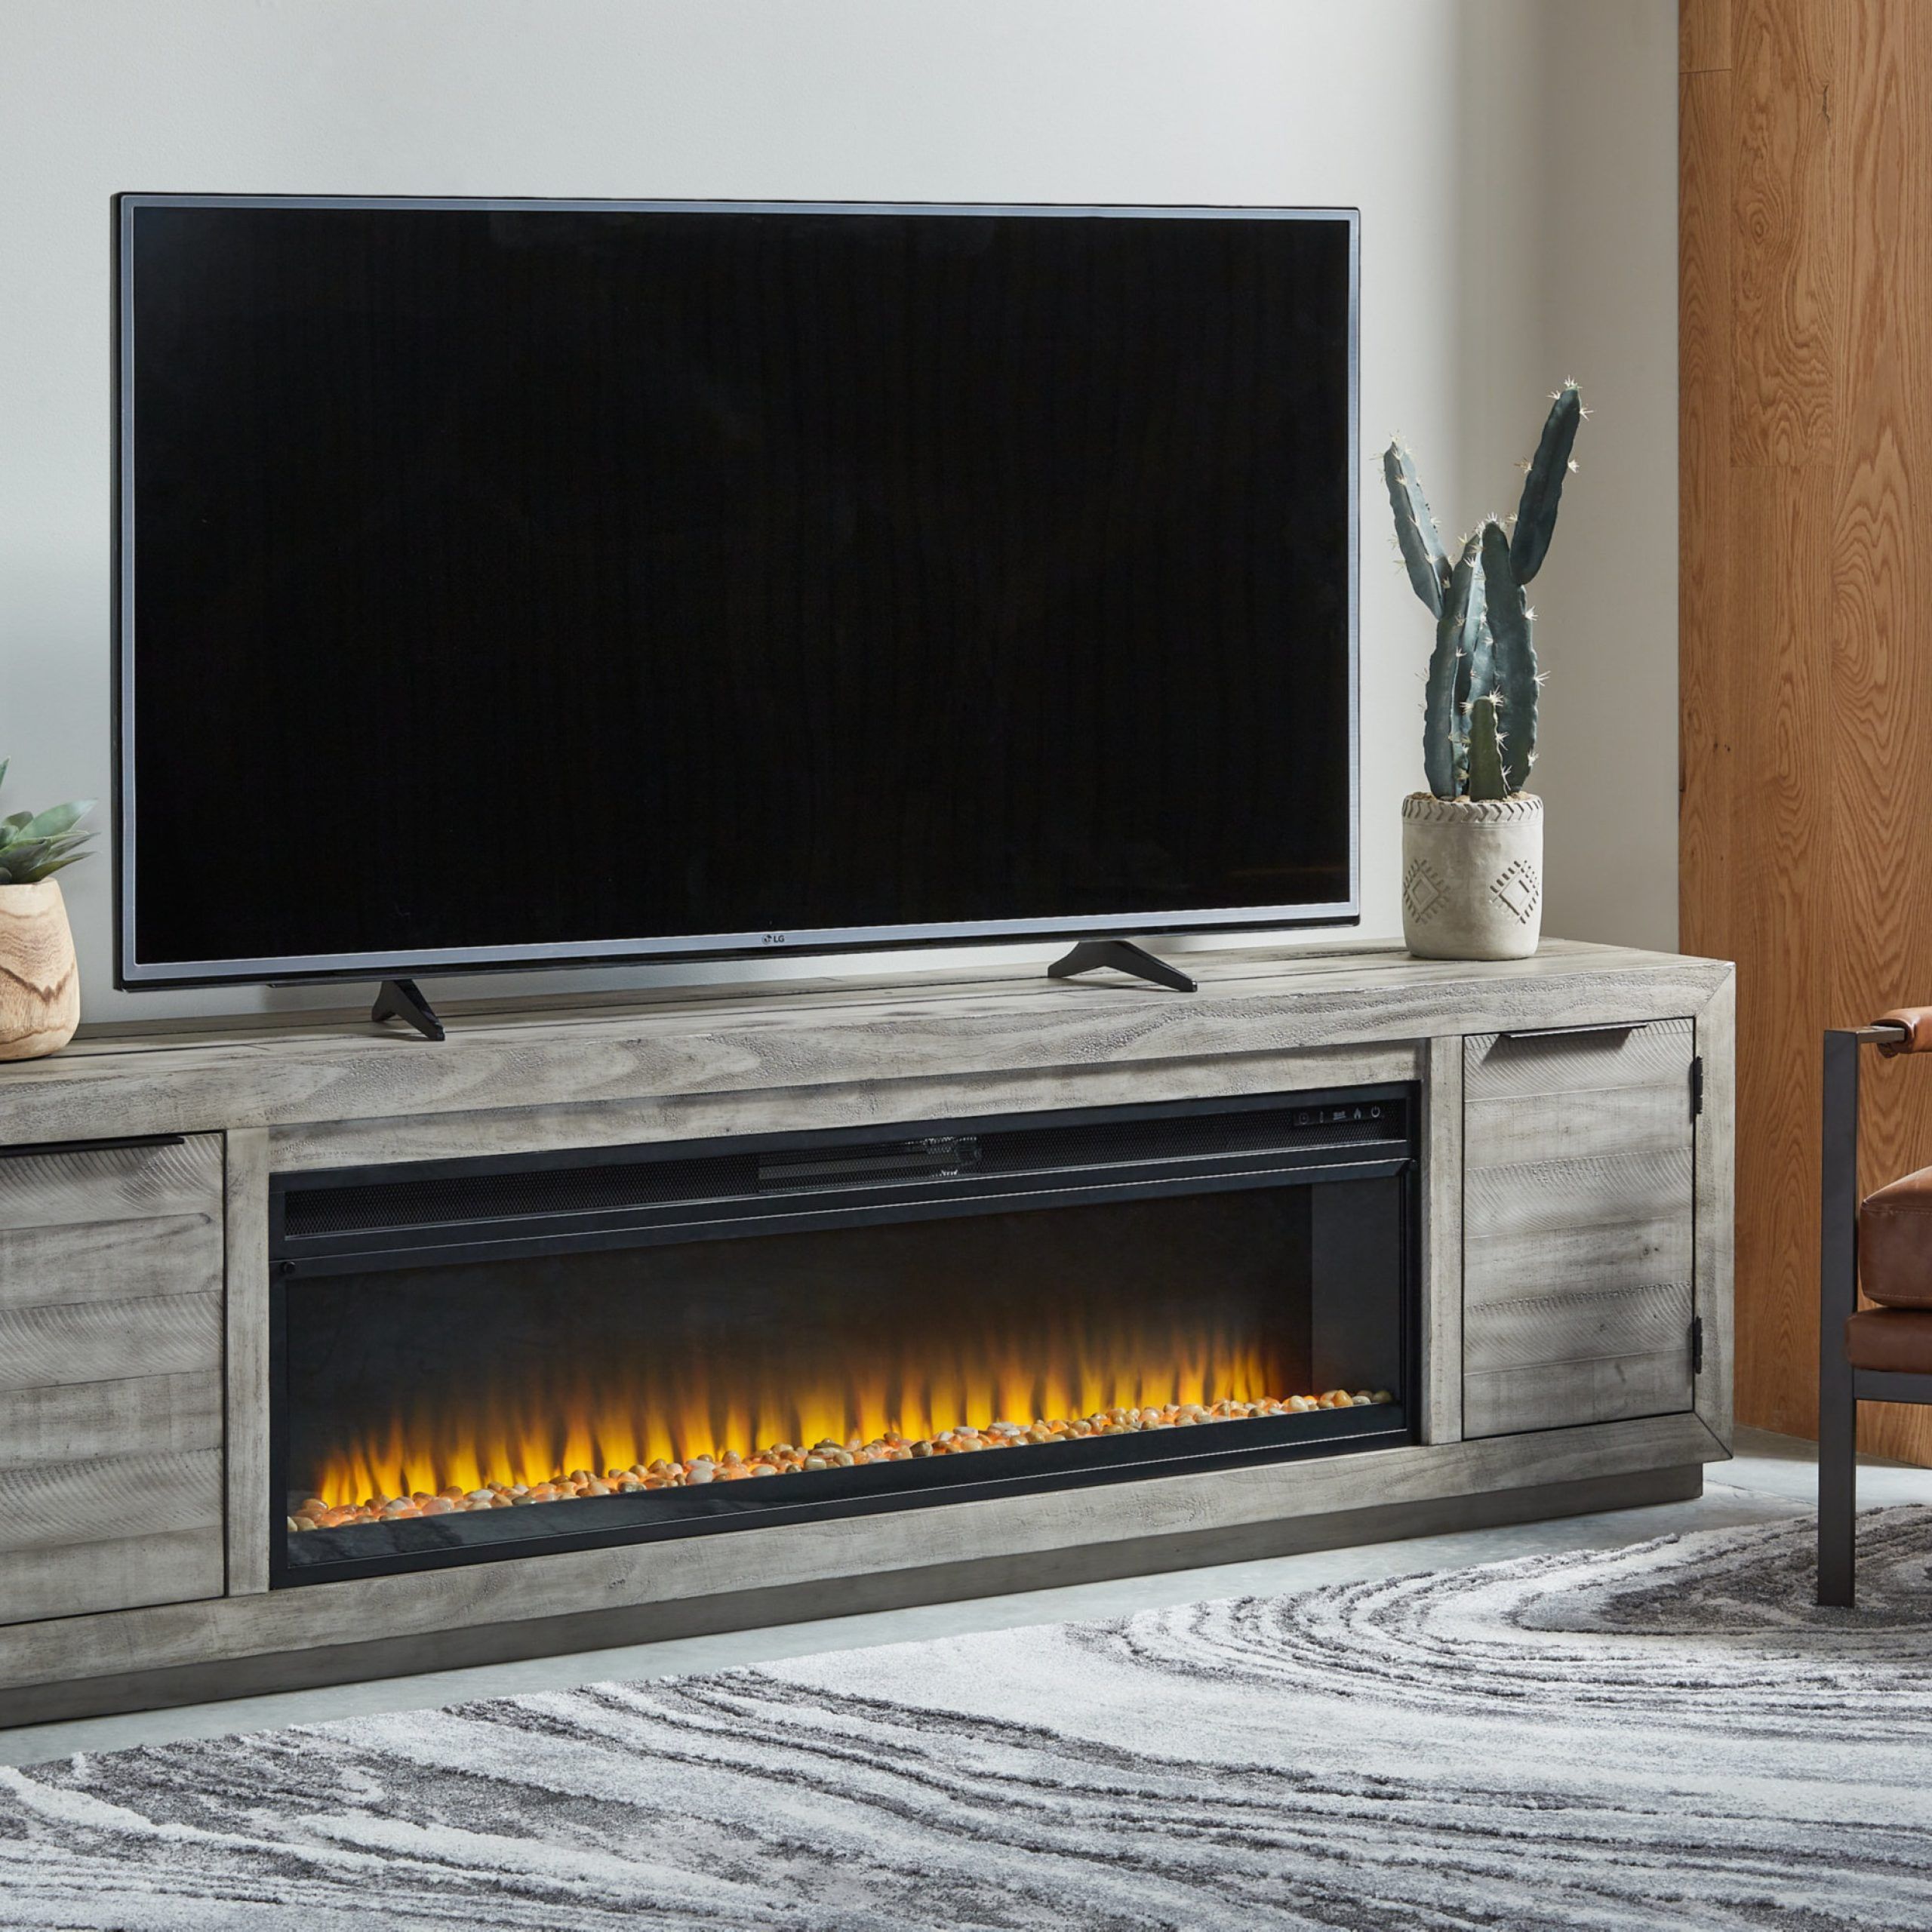 Signature Designashley Naydell Tv Stand For Tvs Up To 88" With Electric  Fireplace Included & Reviews | Wayfair Throughout Electric Fireplace Entertainment Centers (View 11 of 15)